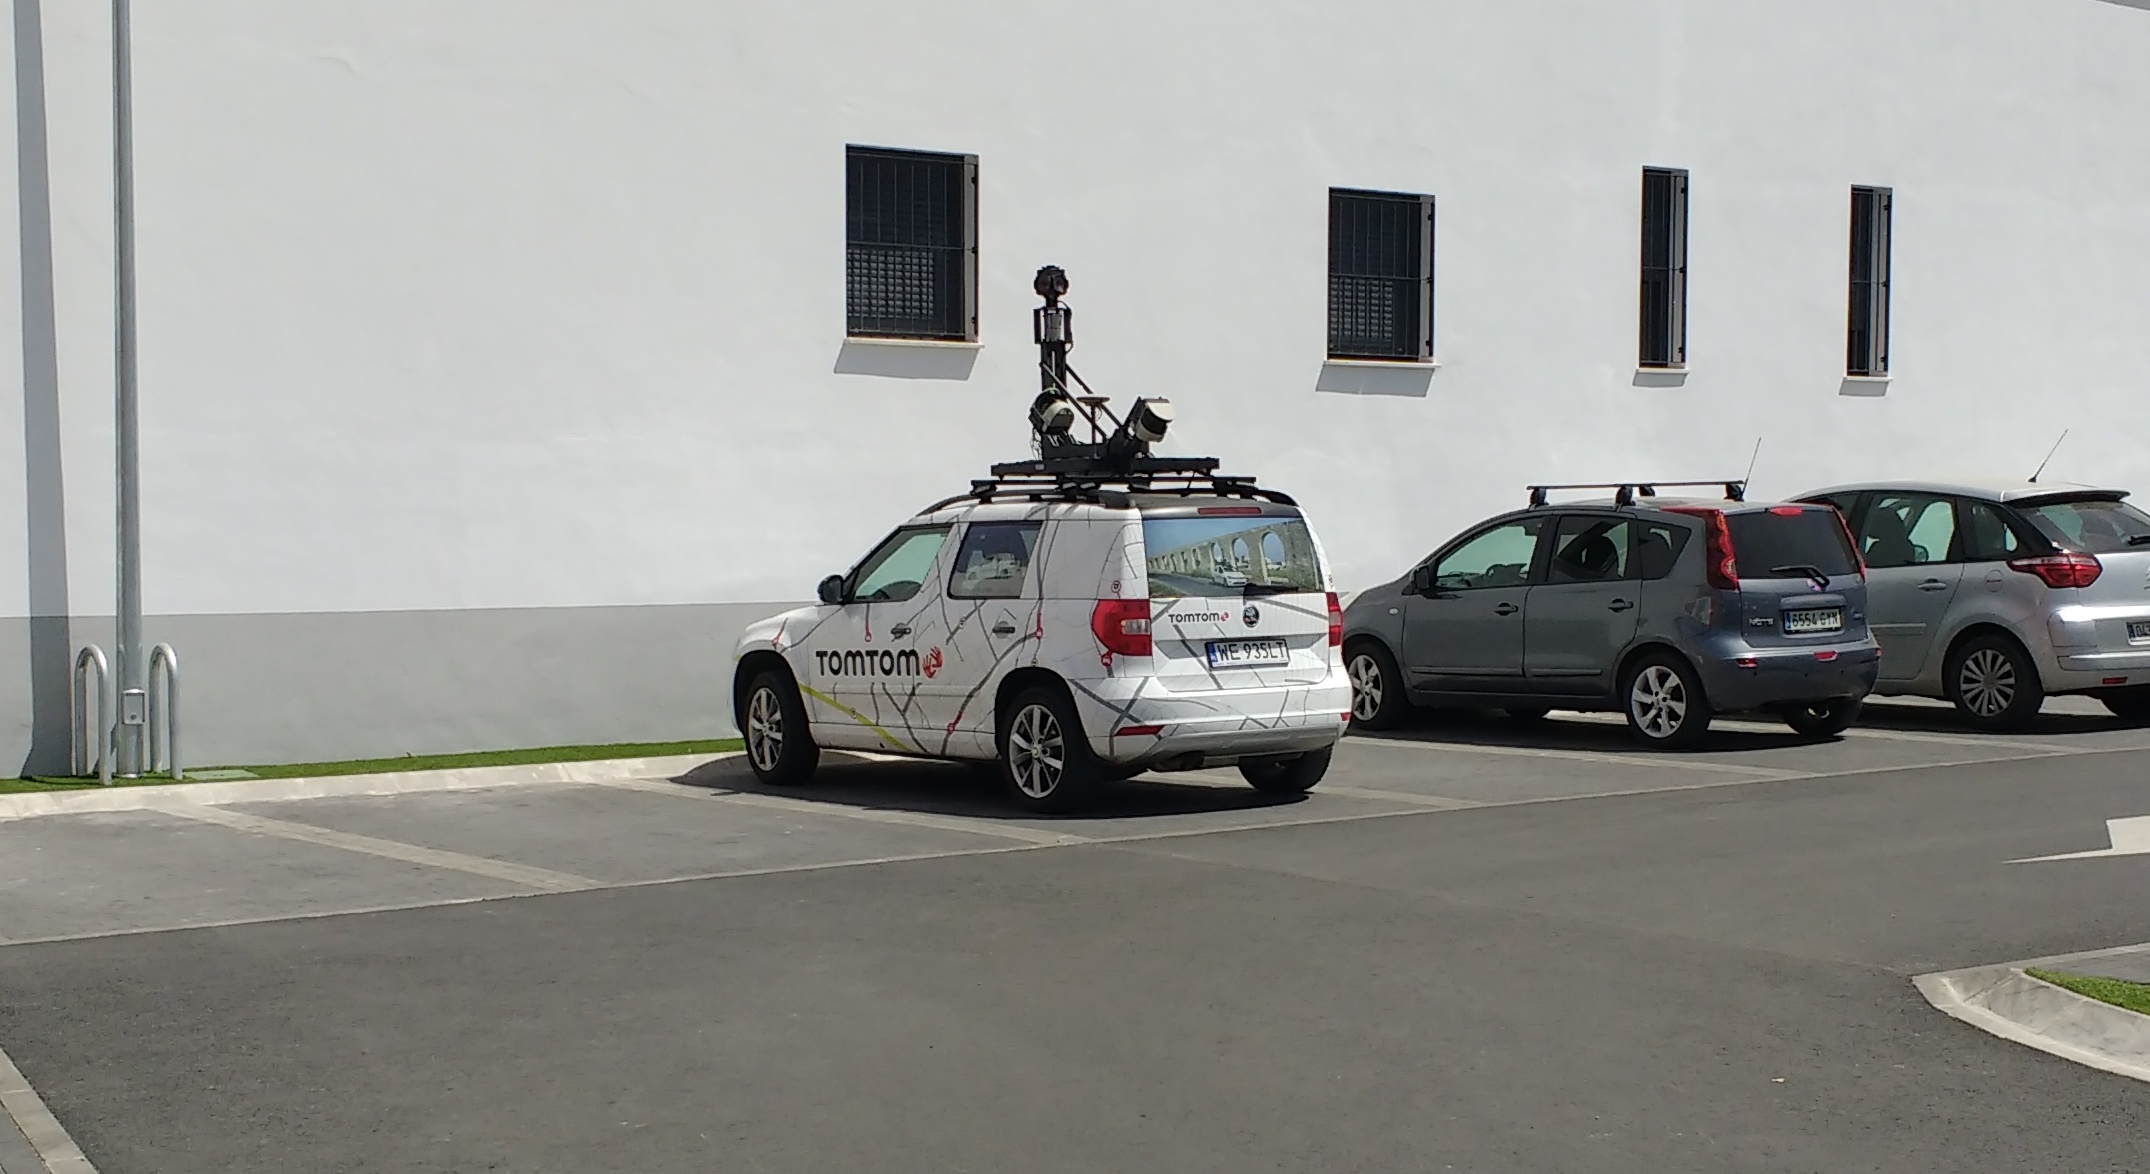 Looks like TomTom are gathering street view data in Antequera. Satnavs will be cool with real images of the scene around you!